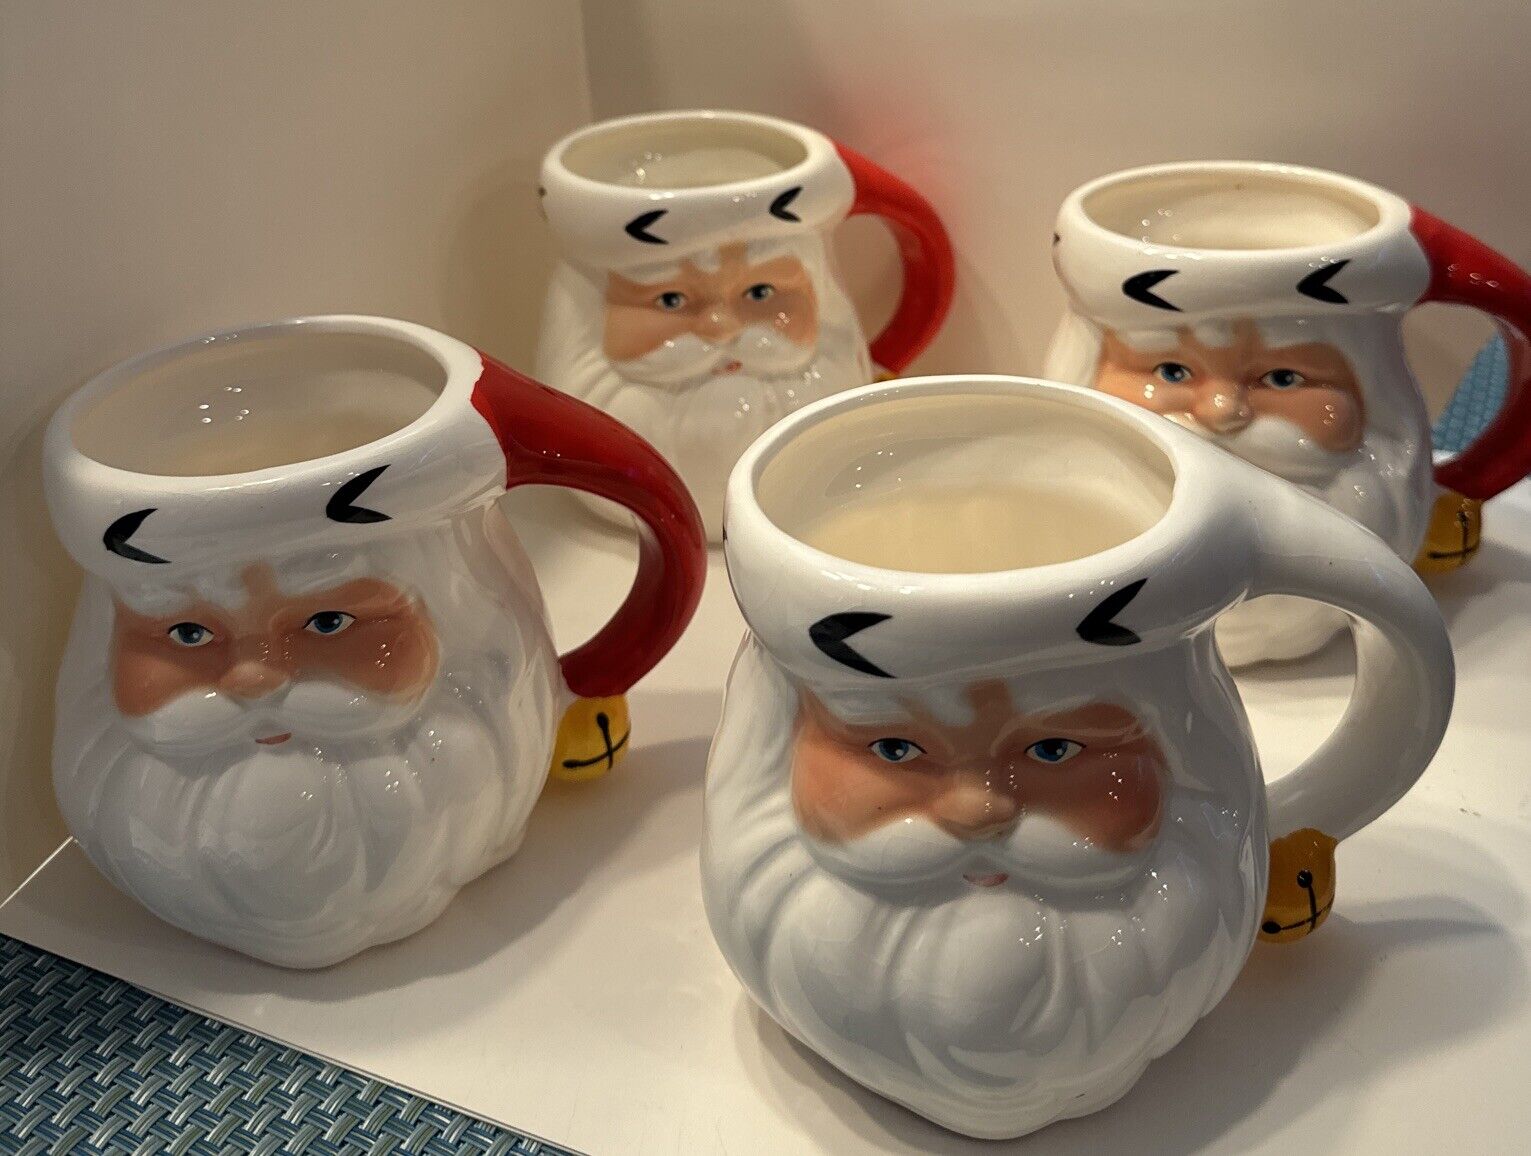 VTG SANTA  ( JOLLY ST. NICK ) Set Of 4 Mugs 1984?  Read Great Cond For Age